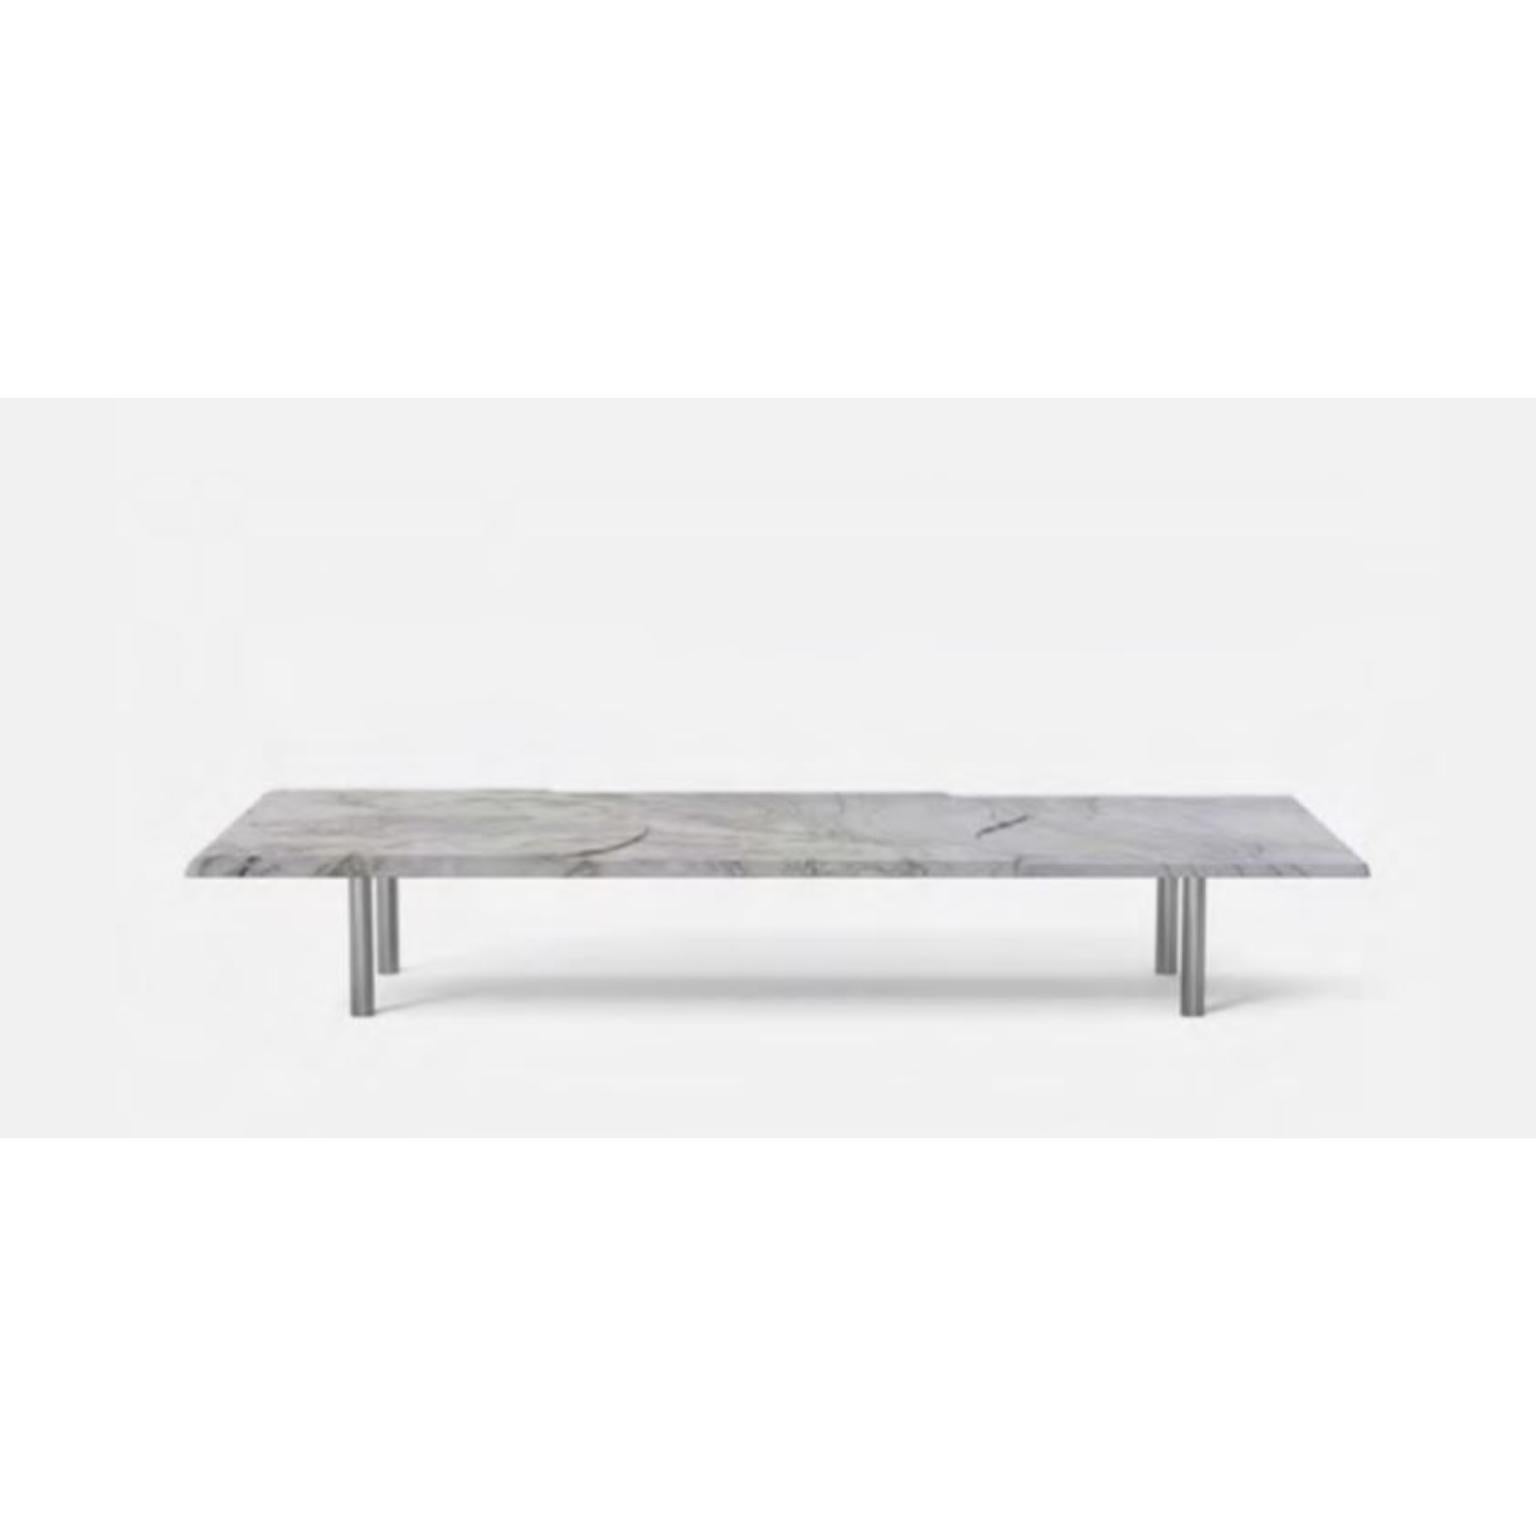 White Maré Coffee Table by Wentz
Dimensions: D 80 x W 160 x H 25 cm
Materials: Granite, Steel.
Also available in Black Brazilian Granite, White Brazilian Quartzite.

The Mesa Centro Maré portrays a phenomenon of water transition. The table top is